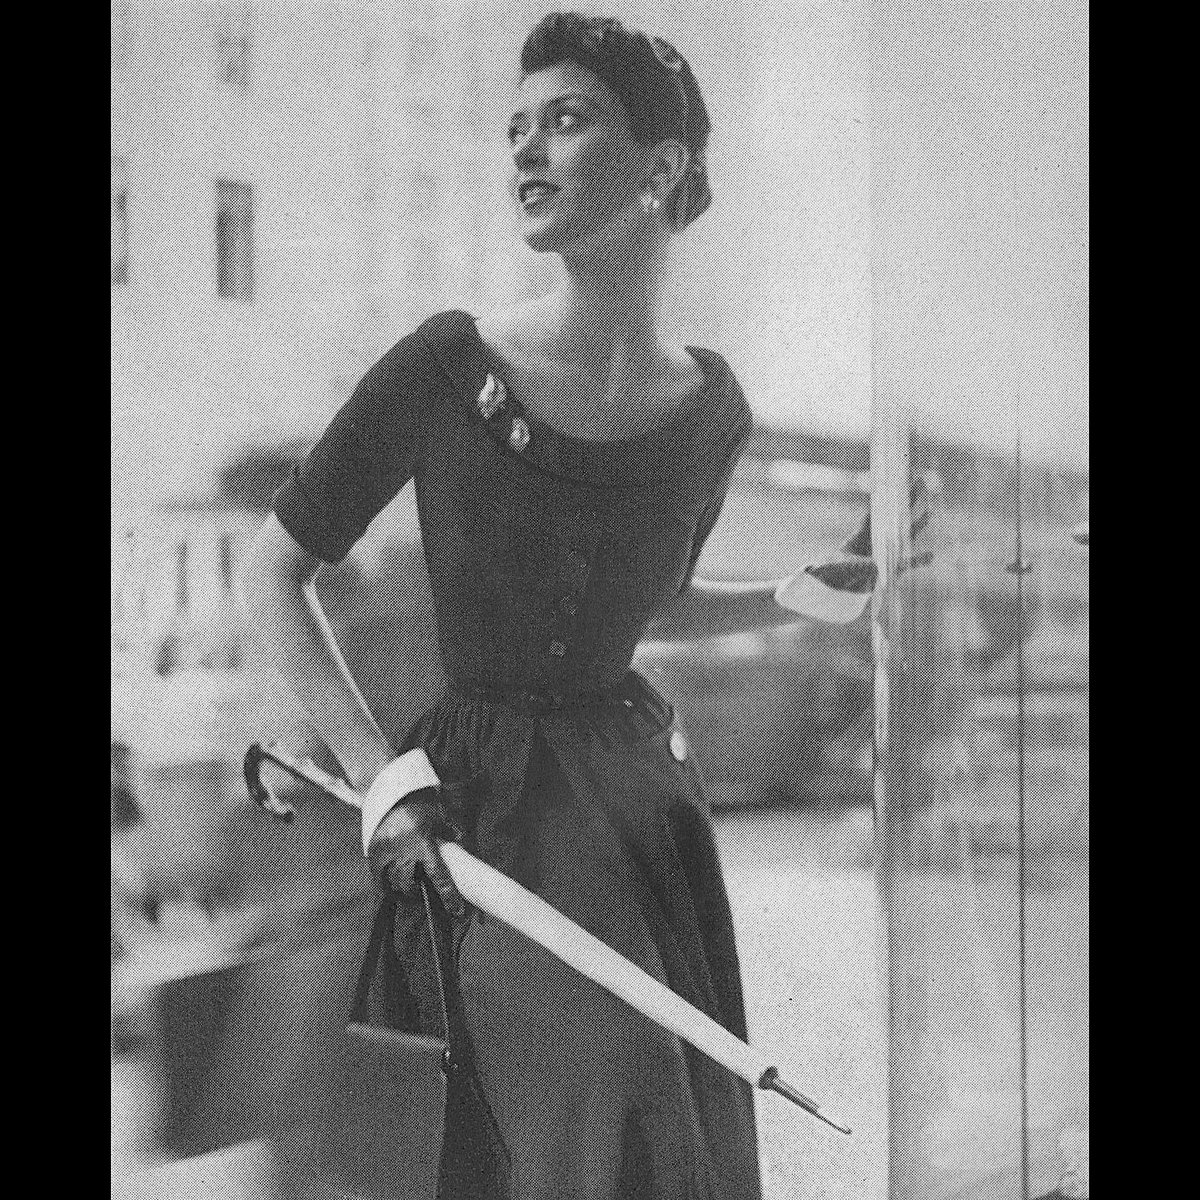 #323

Barbara Mullen wearing a sheer Jane Derby dress. Hat by Mr. John, jewellery by John Nelson.

Holiday, August 1949. Photographed by William Helburn.

#BarbaraMullen #Holiday #JaneDerby #MrJohn #JohnNelson #WilliamHelburn #TheReplacementGirl #FashionHistory #ModelHistory